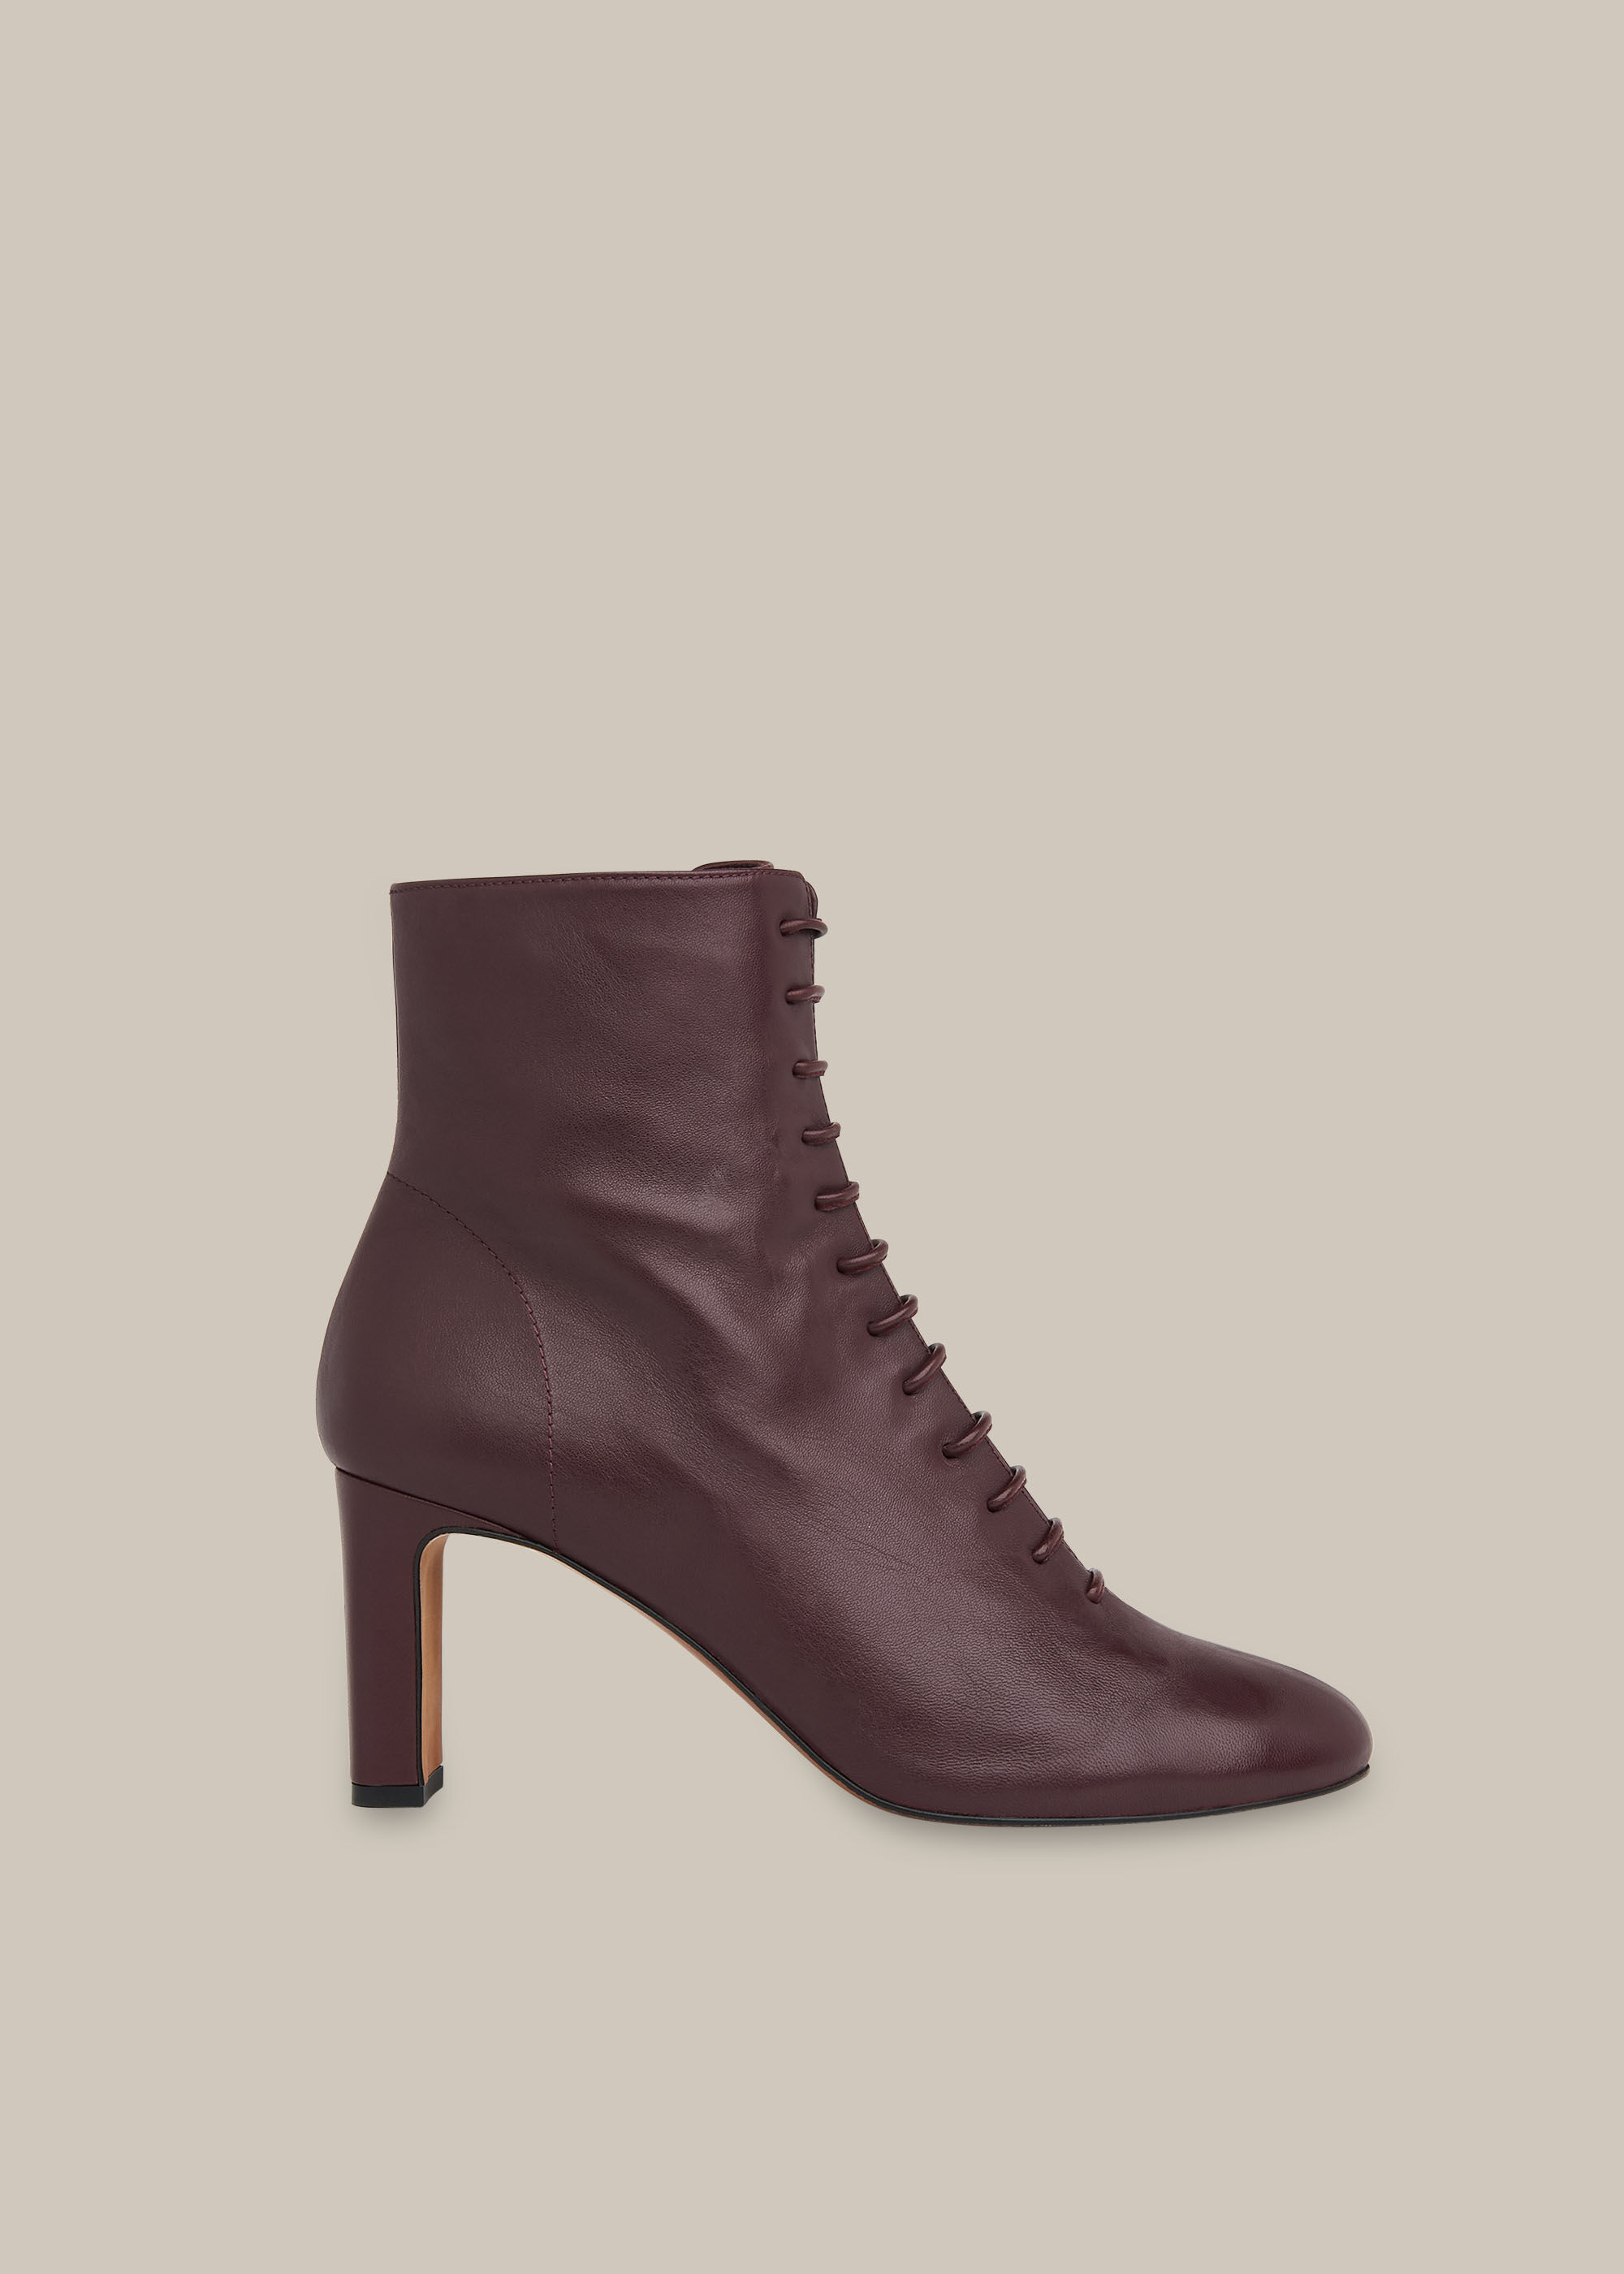 plum ankle boots uk